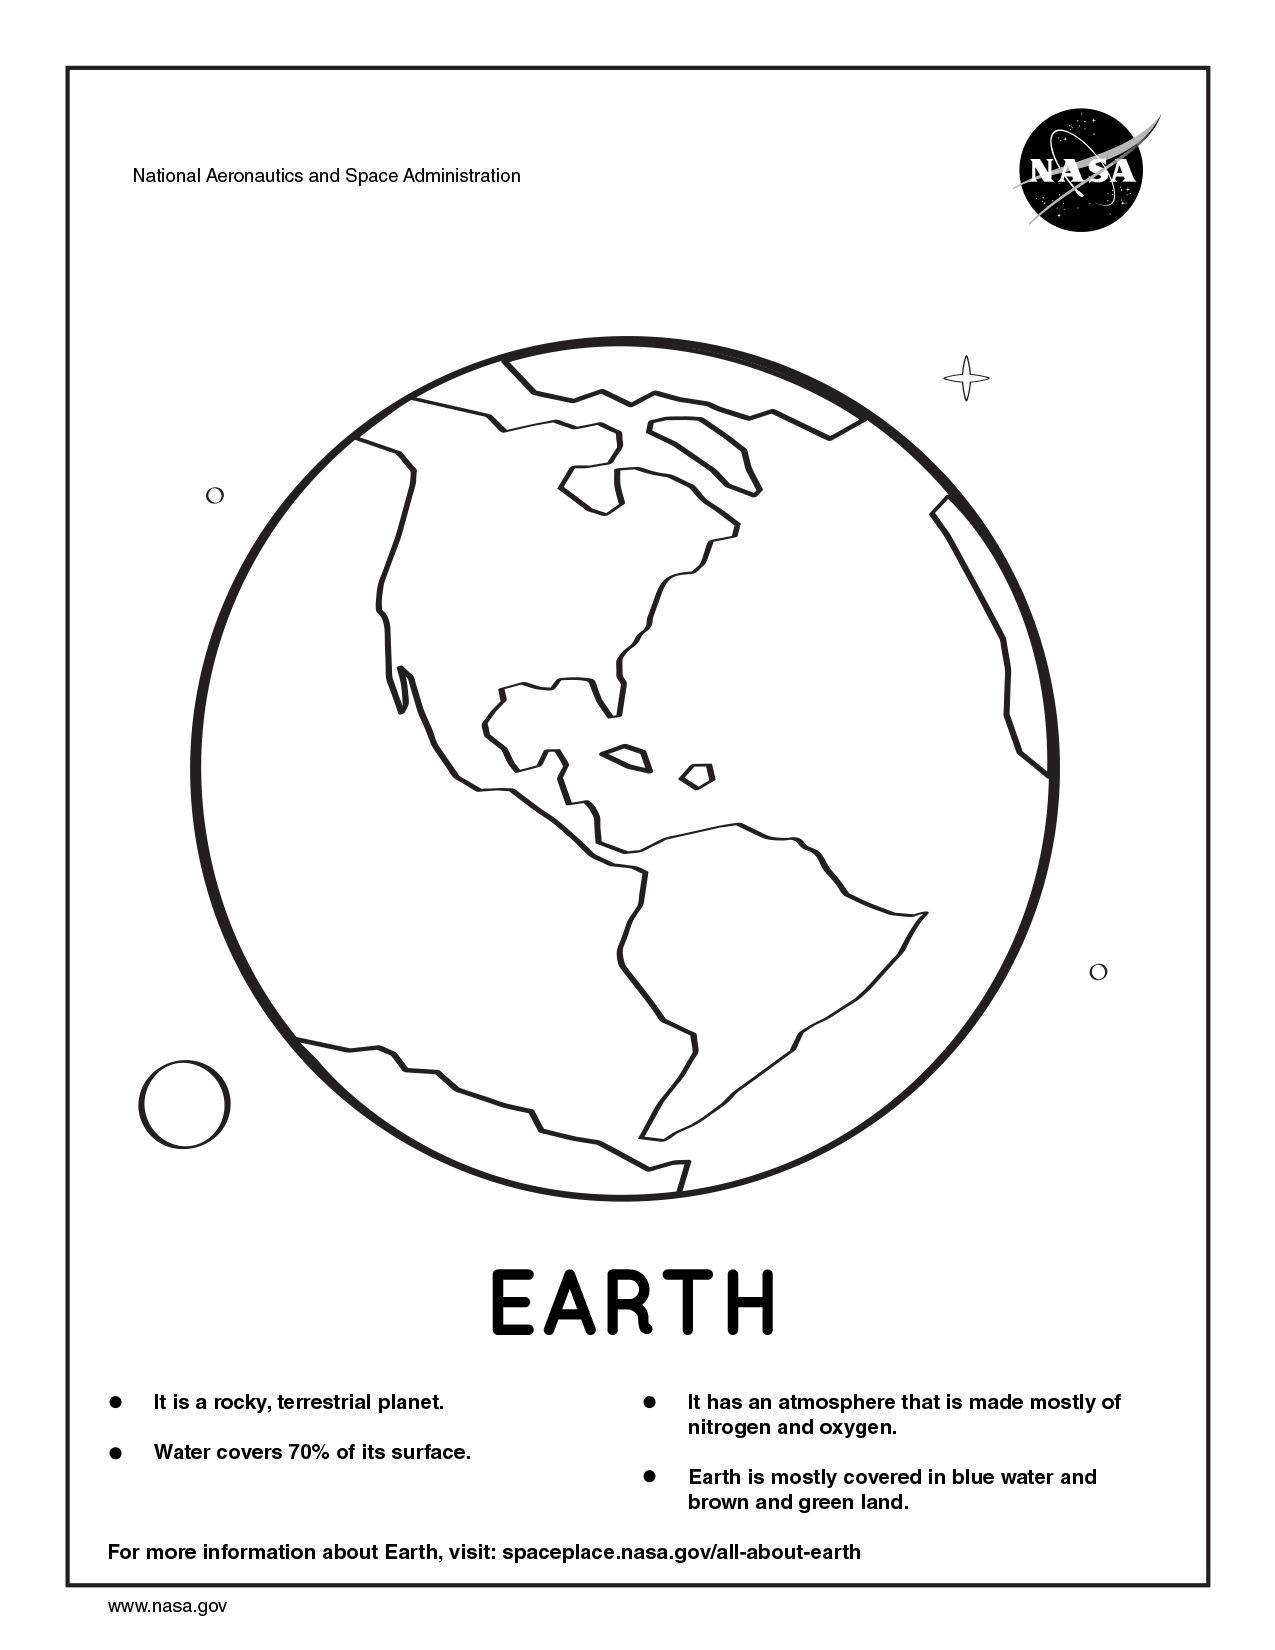 Black and white coloring page for Earth.